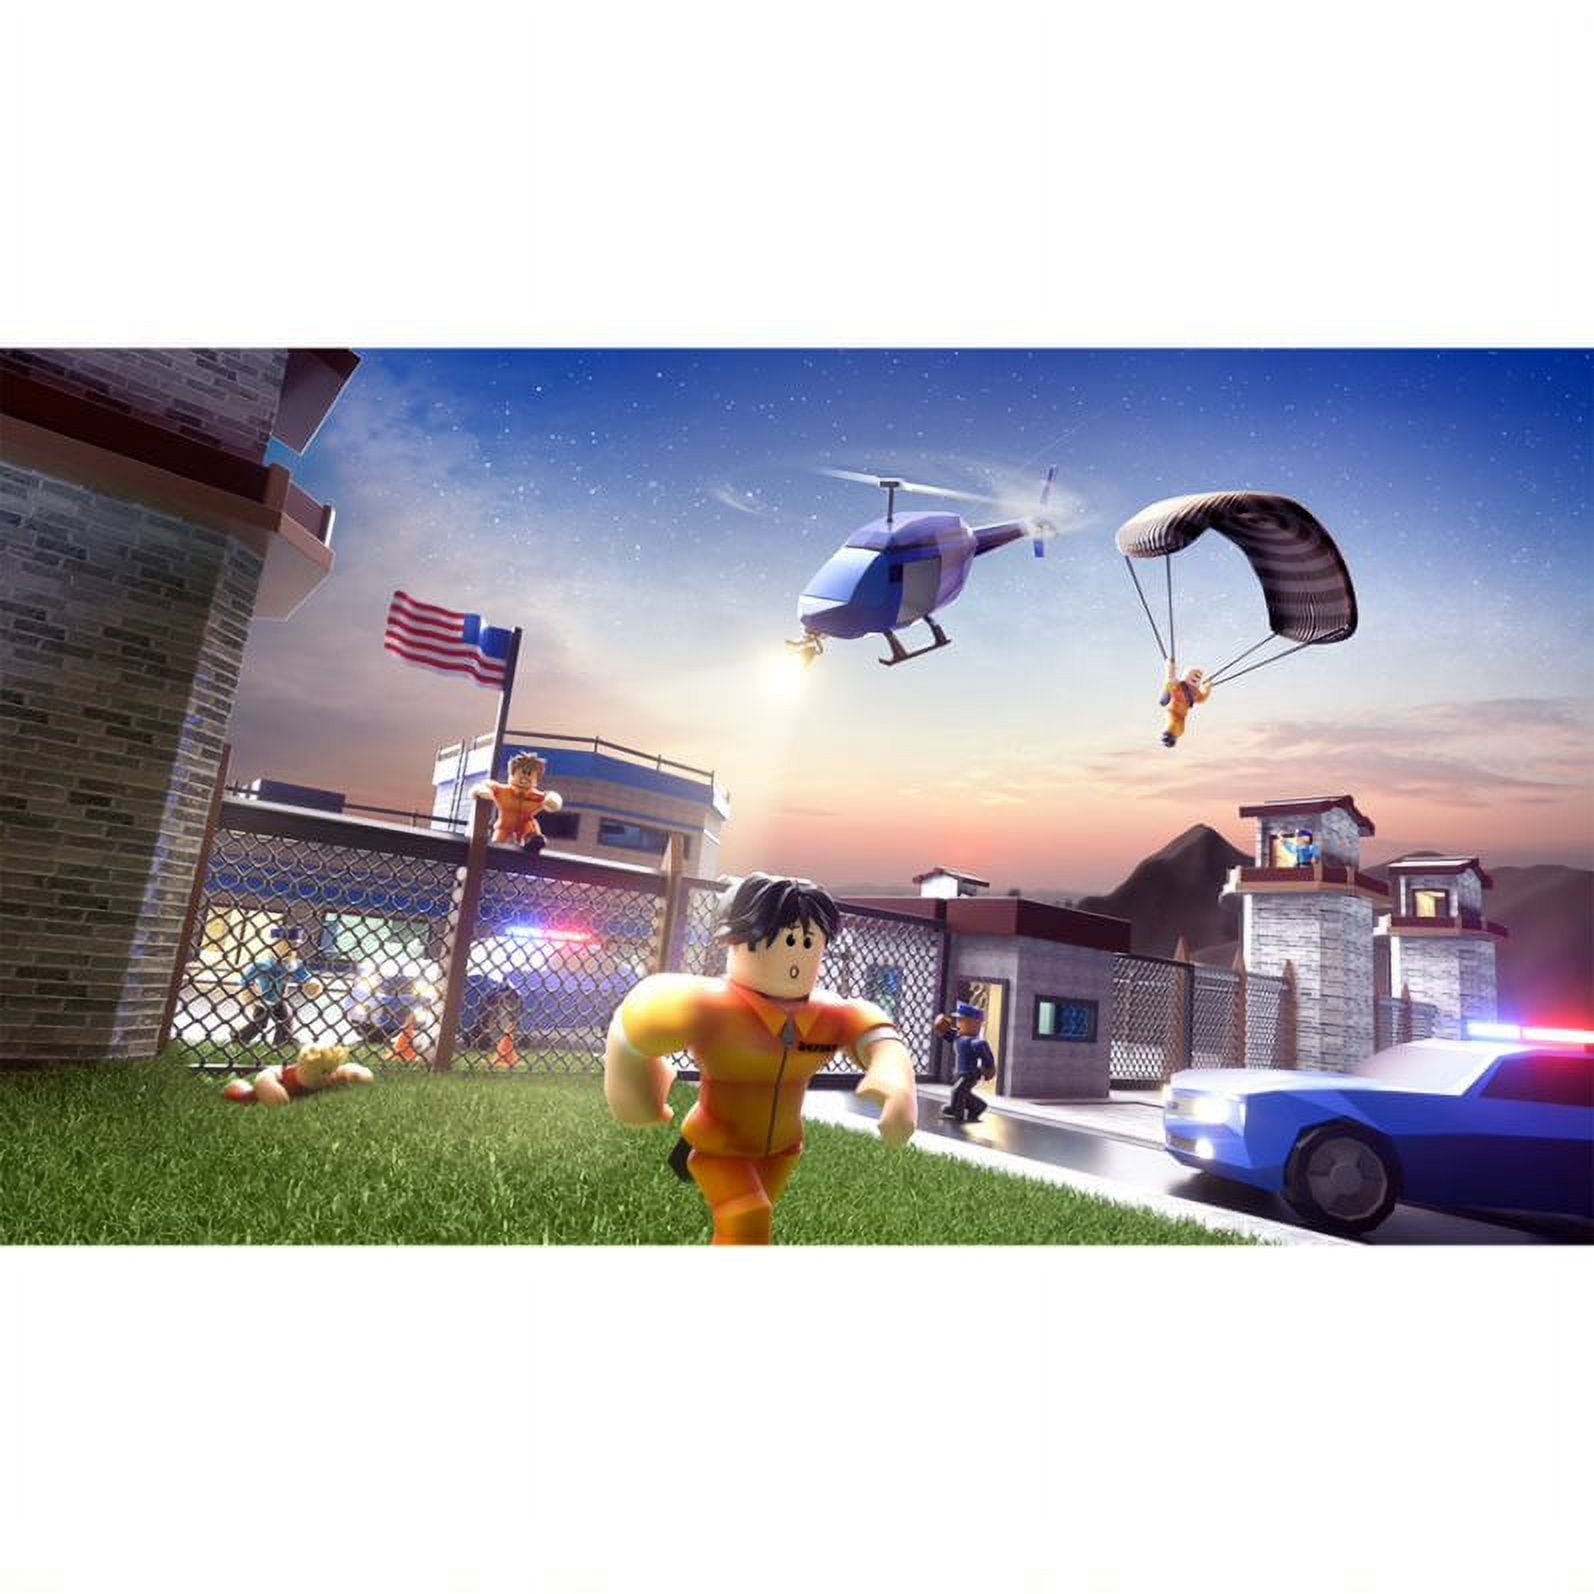 Roblox Slated For Xbox One Release in Three Weeks